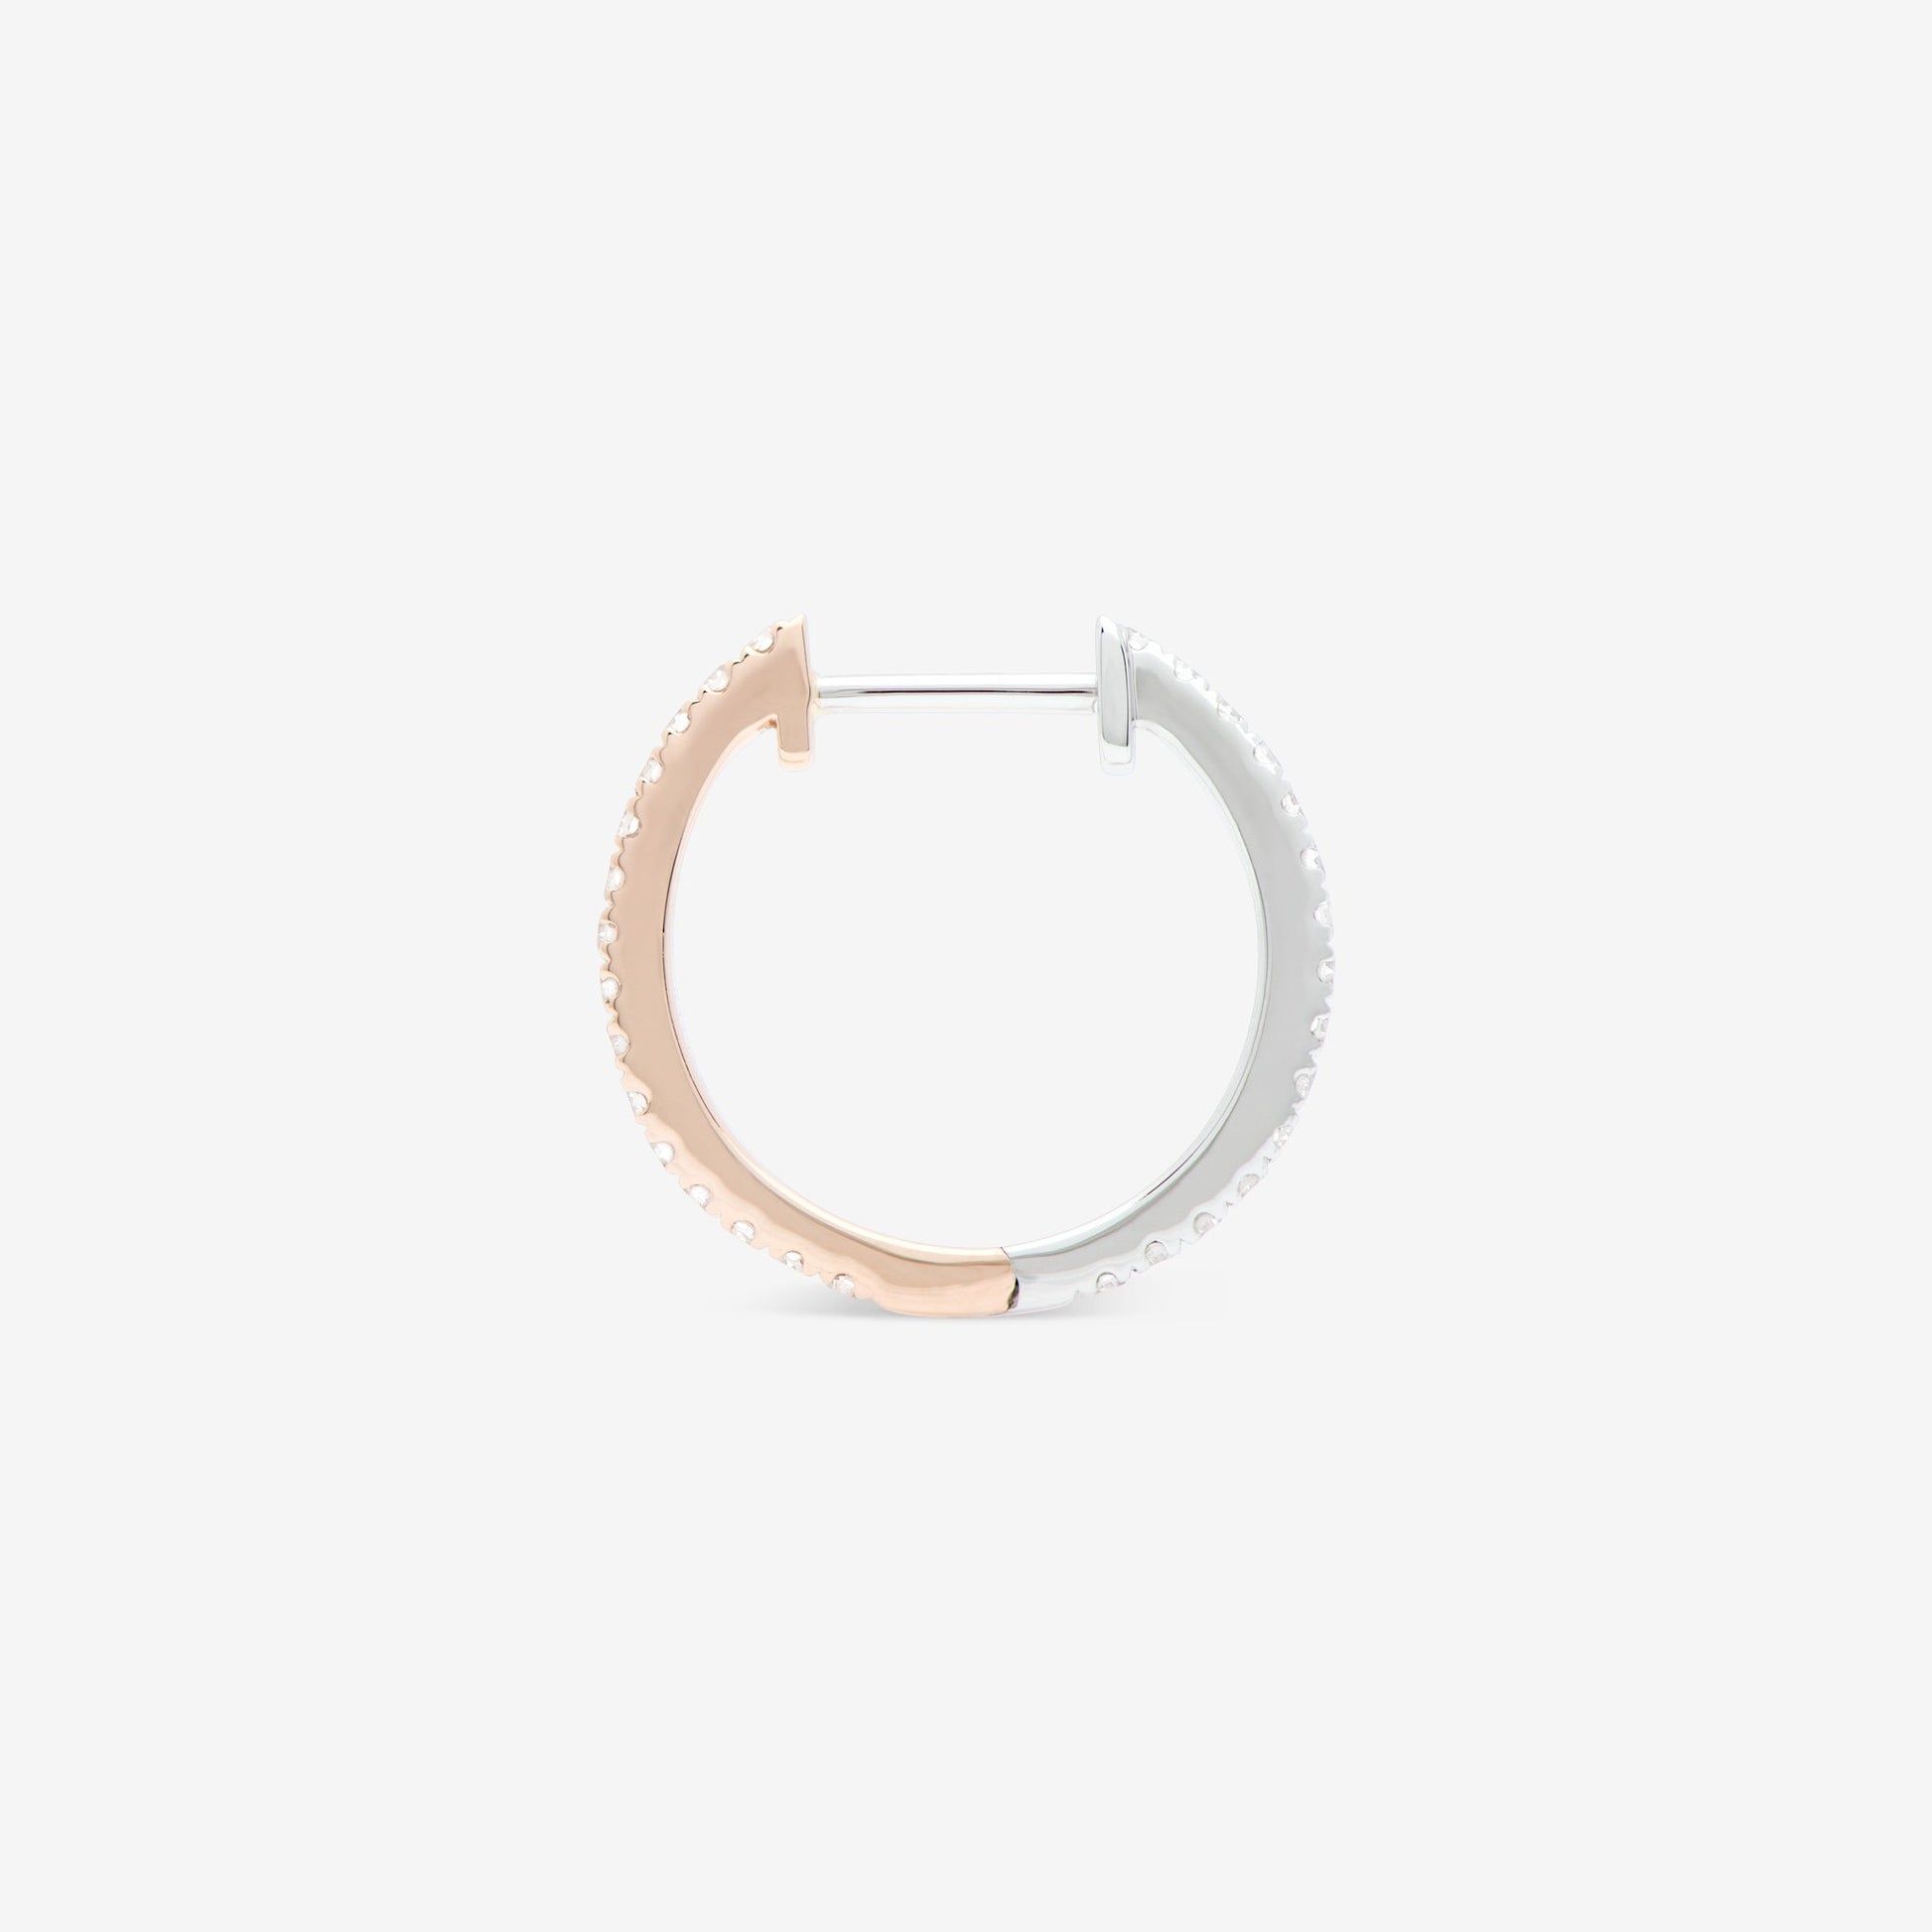 ENNUI Atelier 14mm hoop with white diamond set in rose and white gold from side